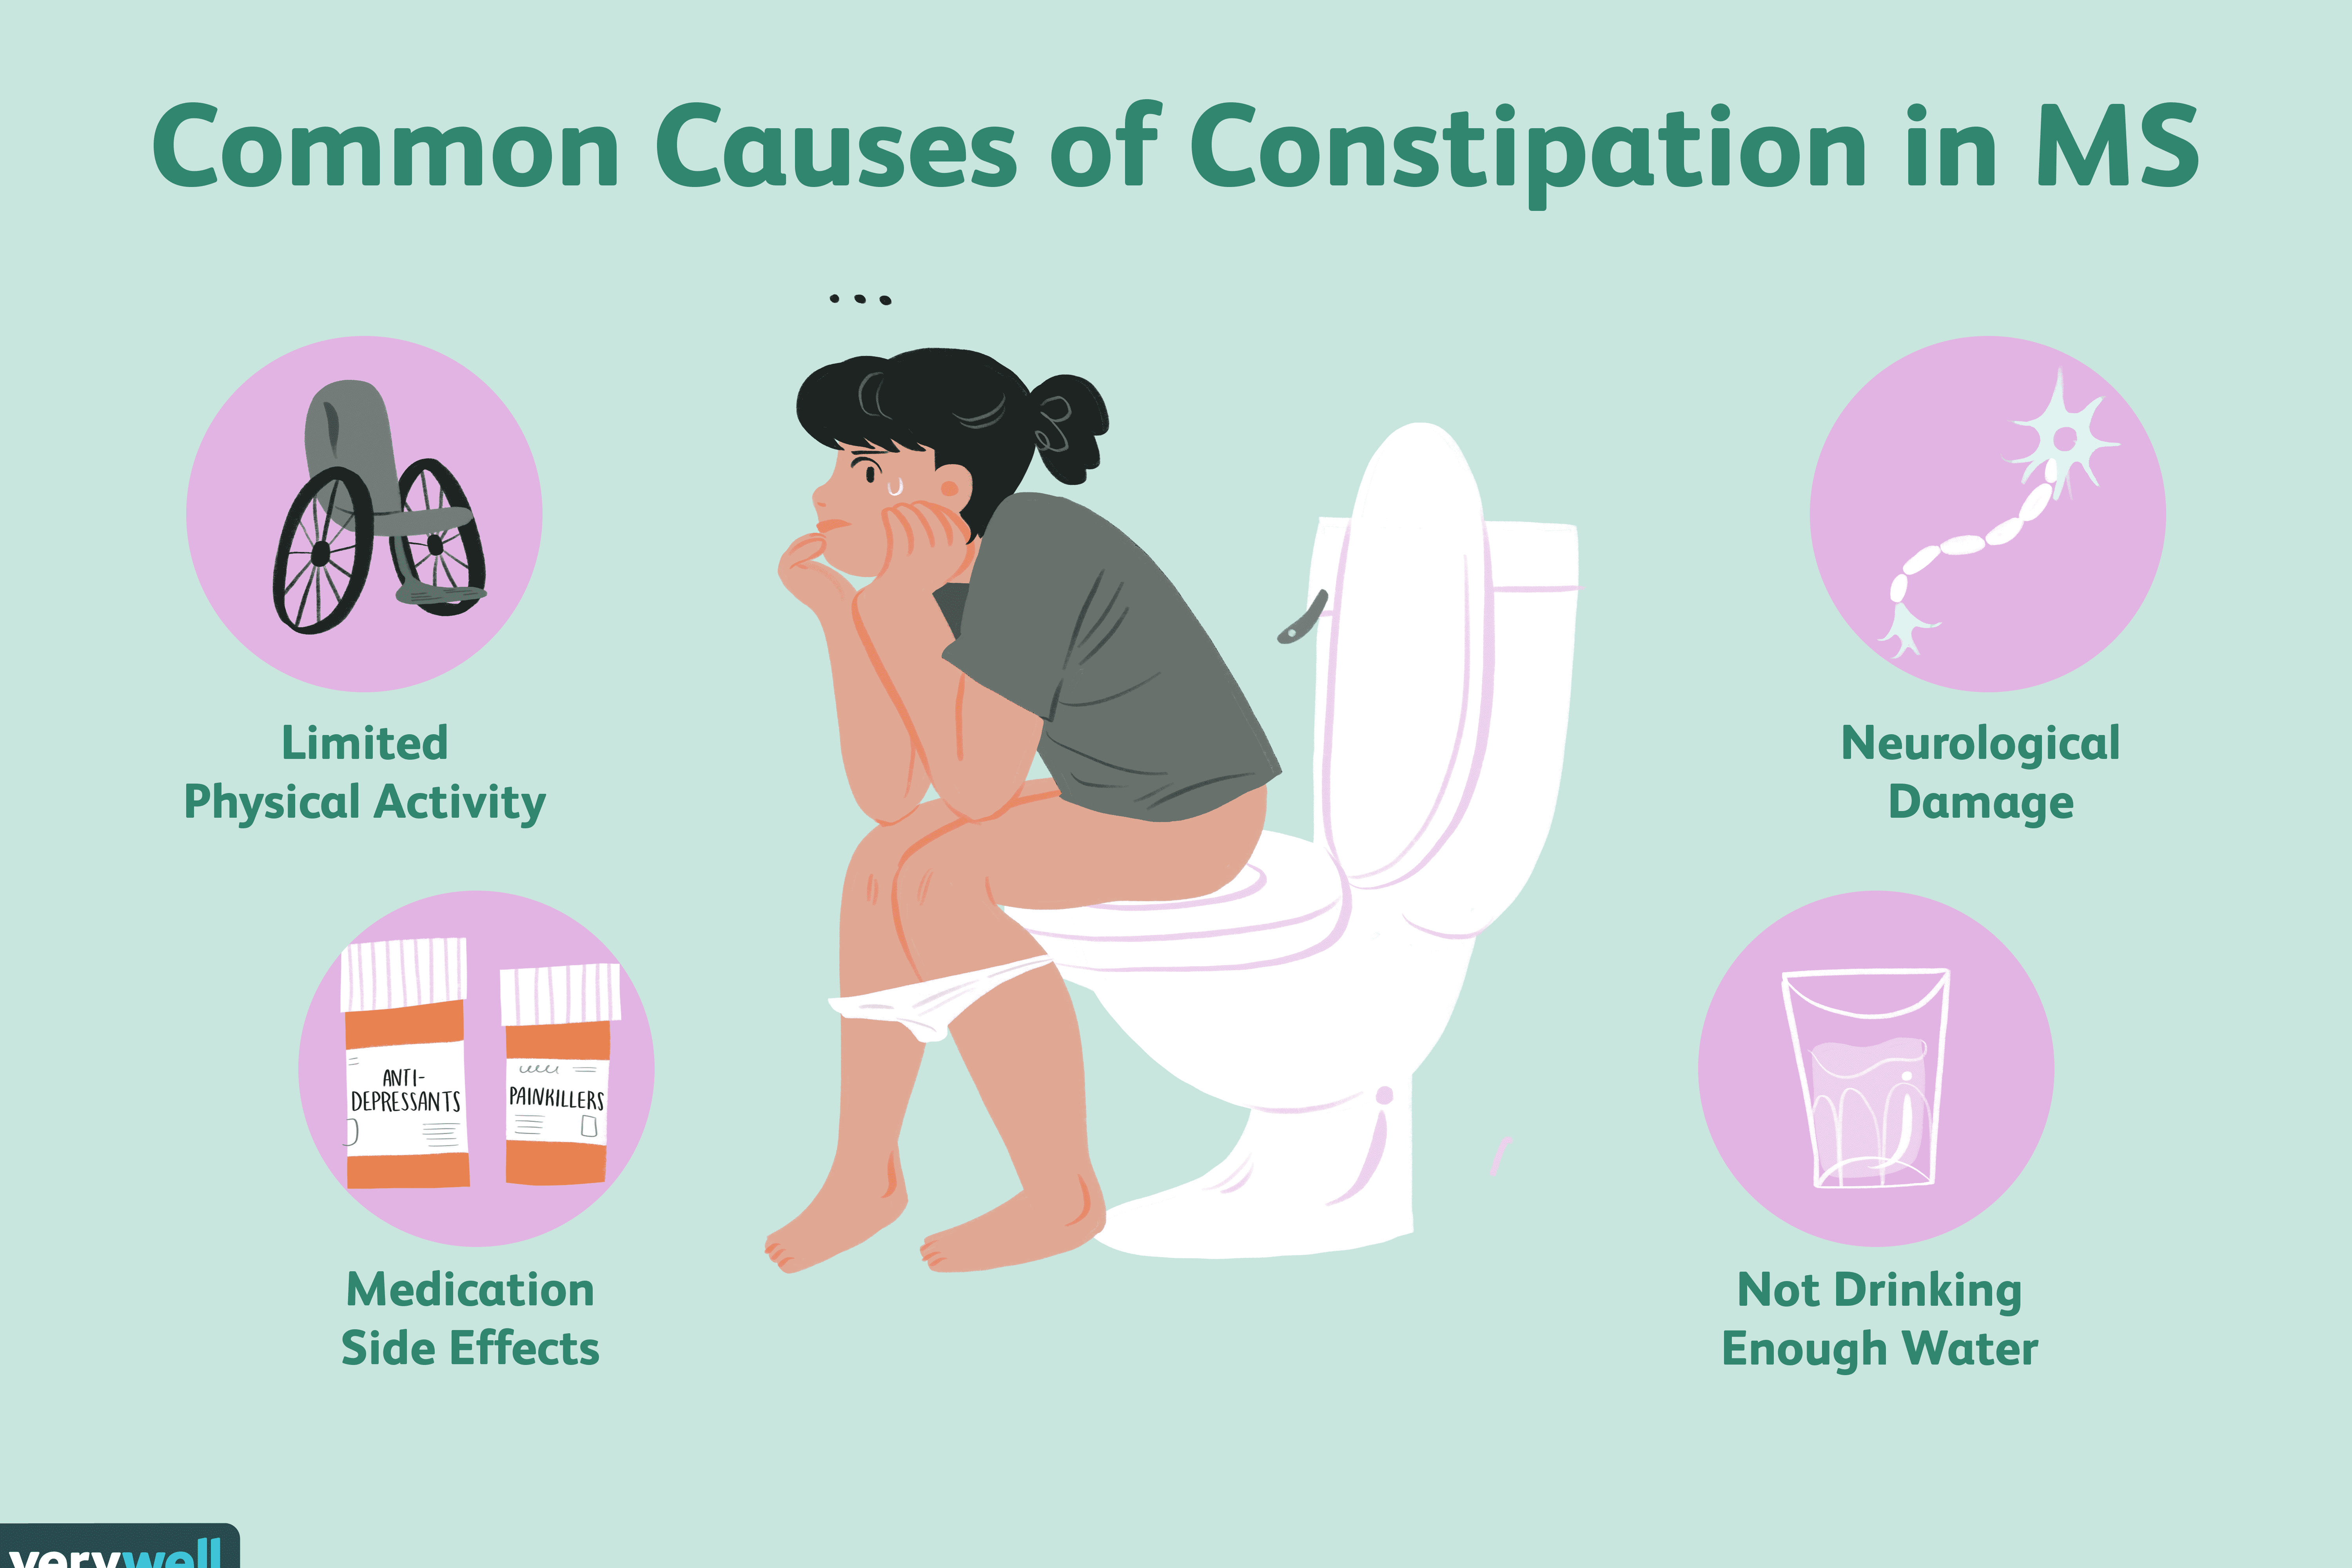 Constipation in MS: Causes, Diagnosis, and Treatment